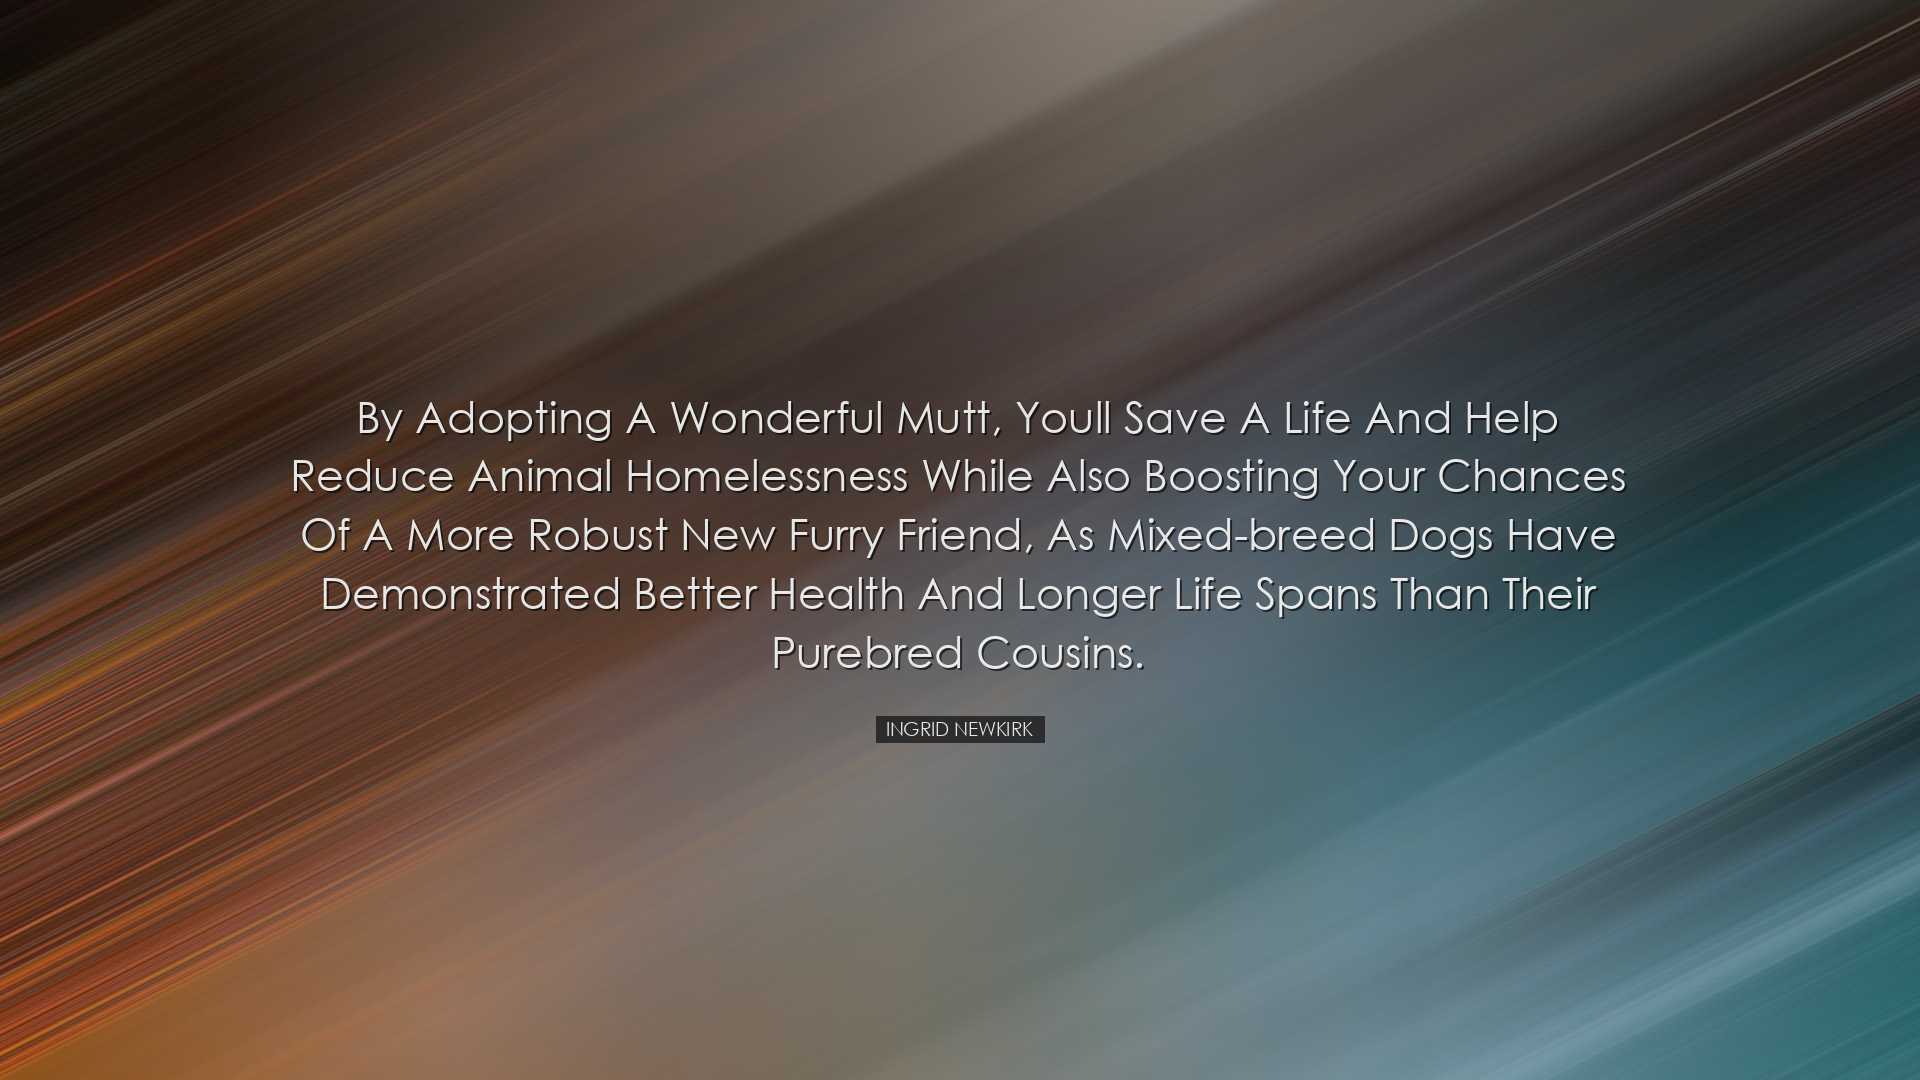 By adopting a wonderful mutt, youll save a life and help reduce an